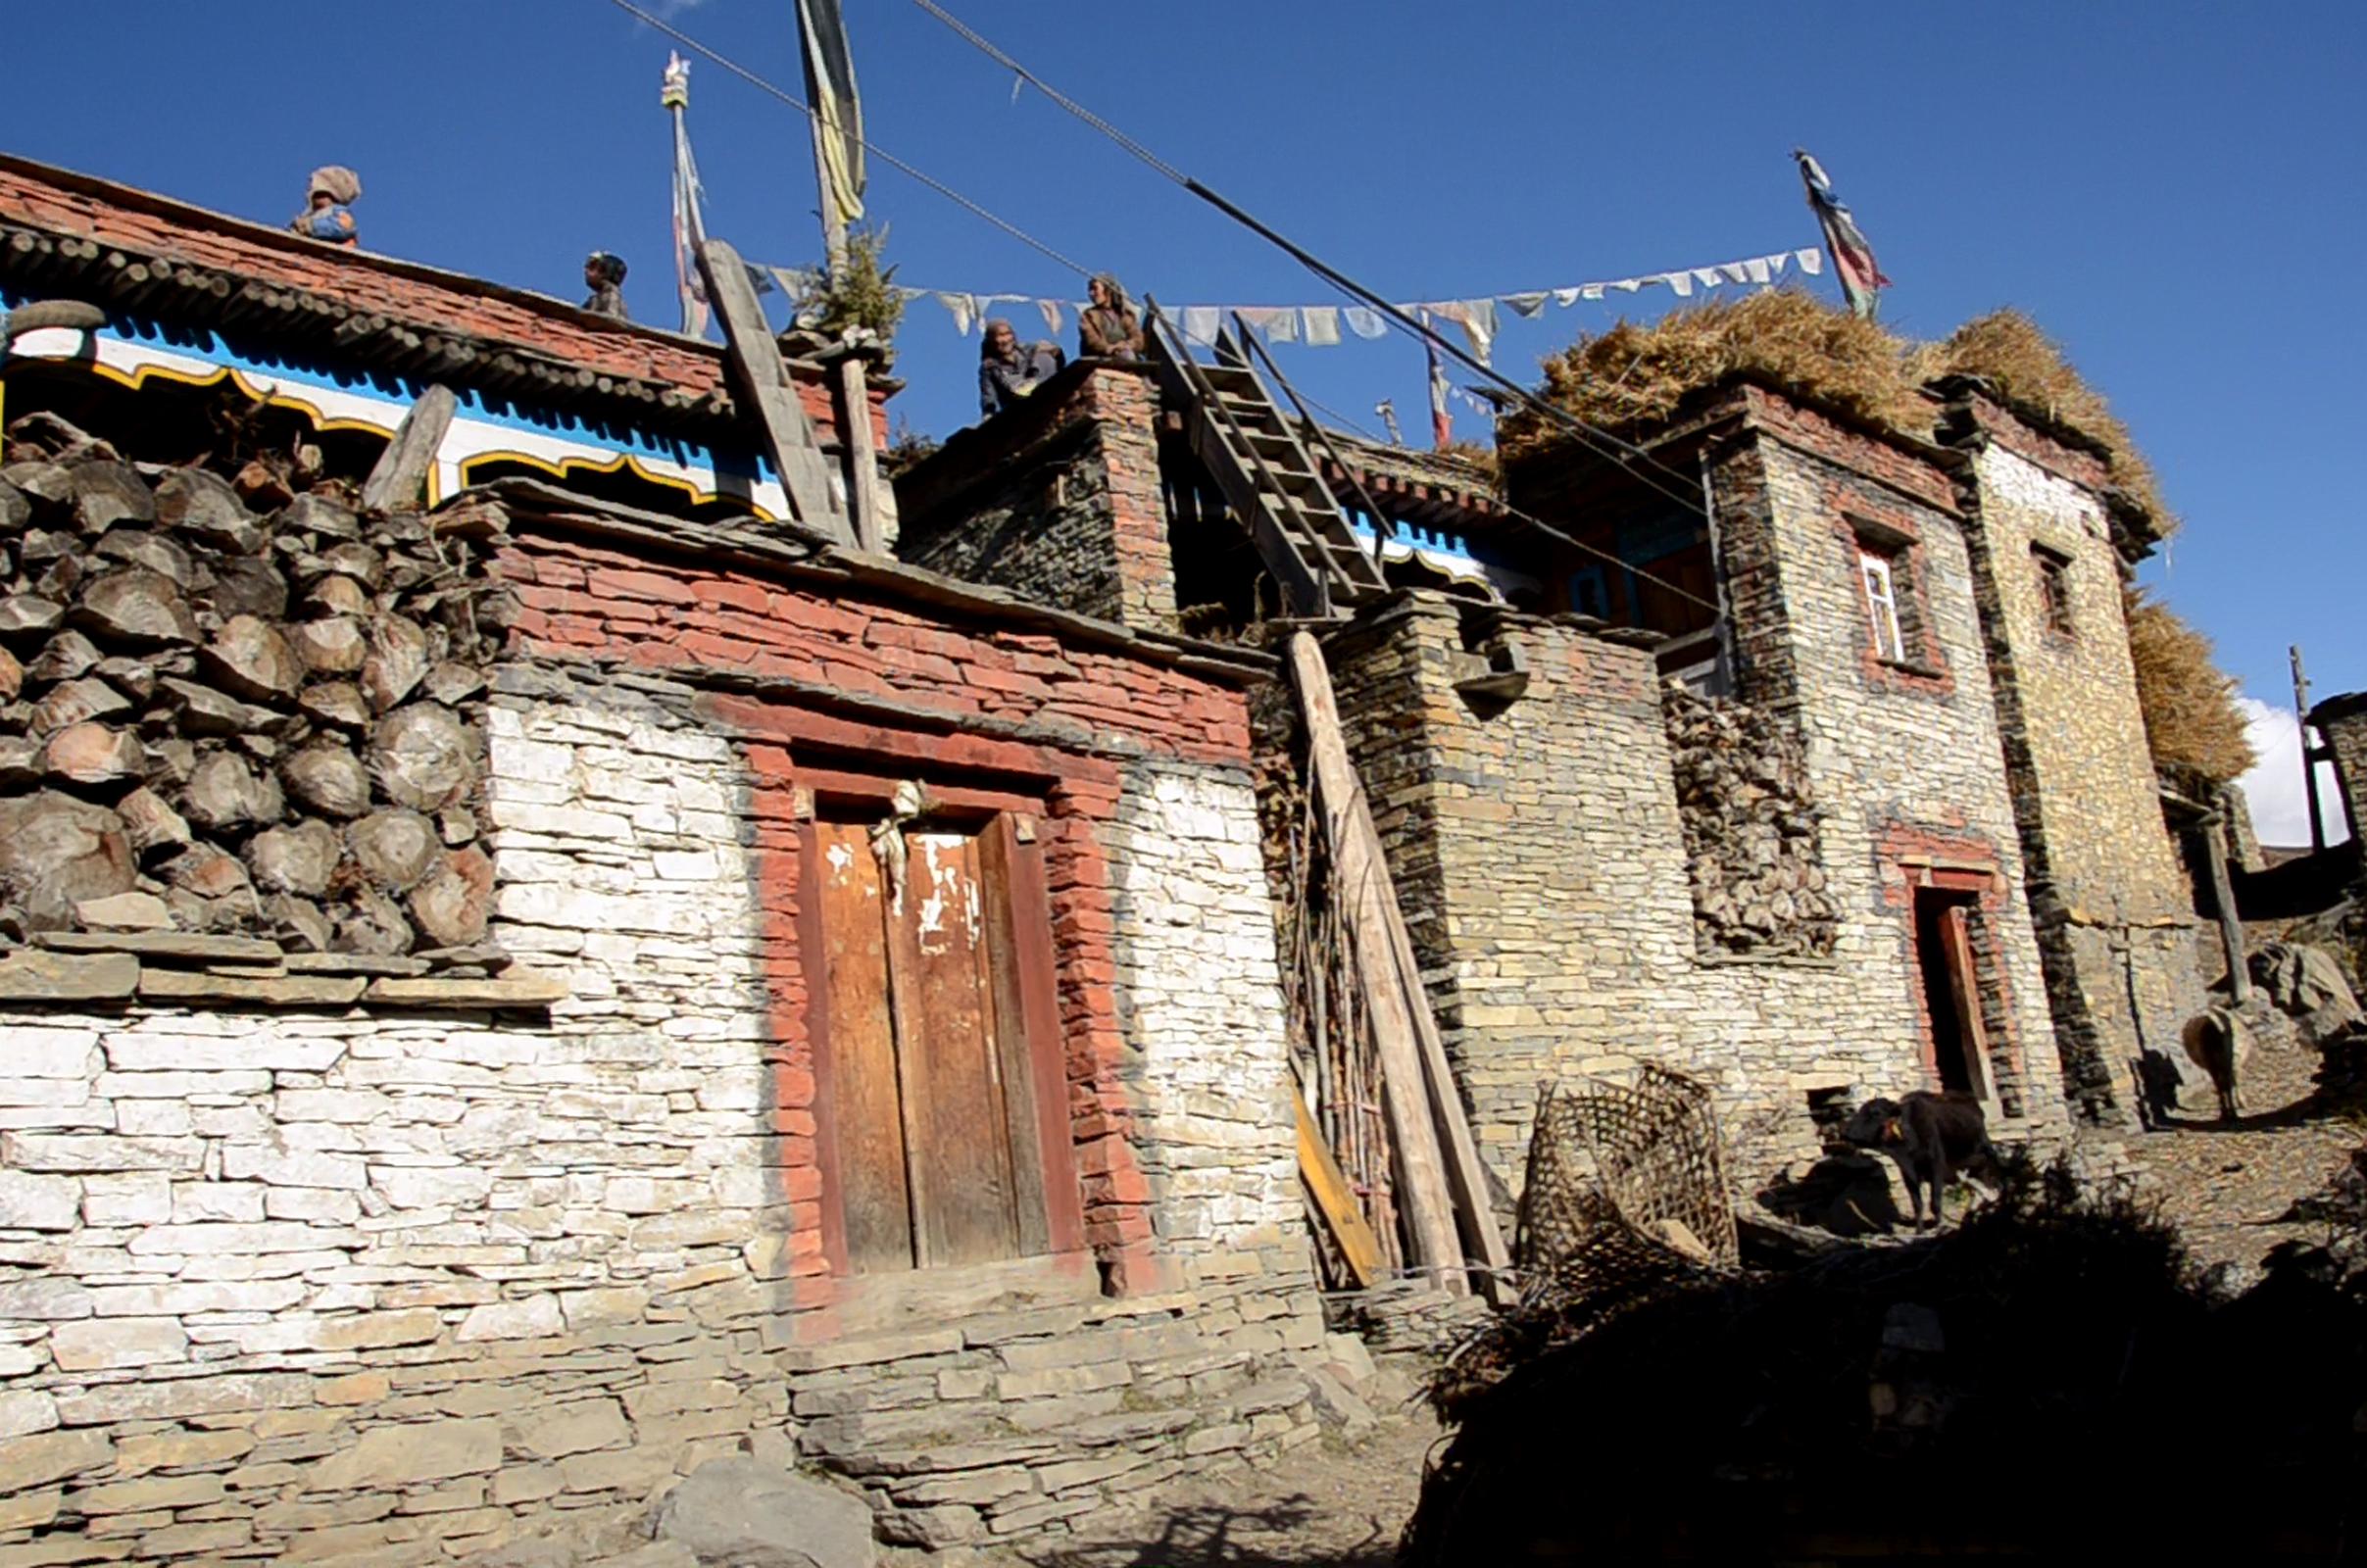 08 People On The Roofs Of Houses In Nar Village Stacked With Hay And Cows Down Below 